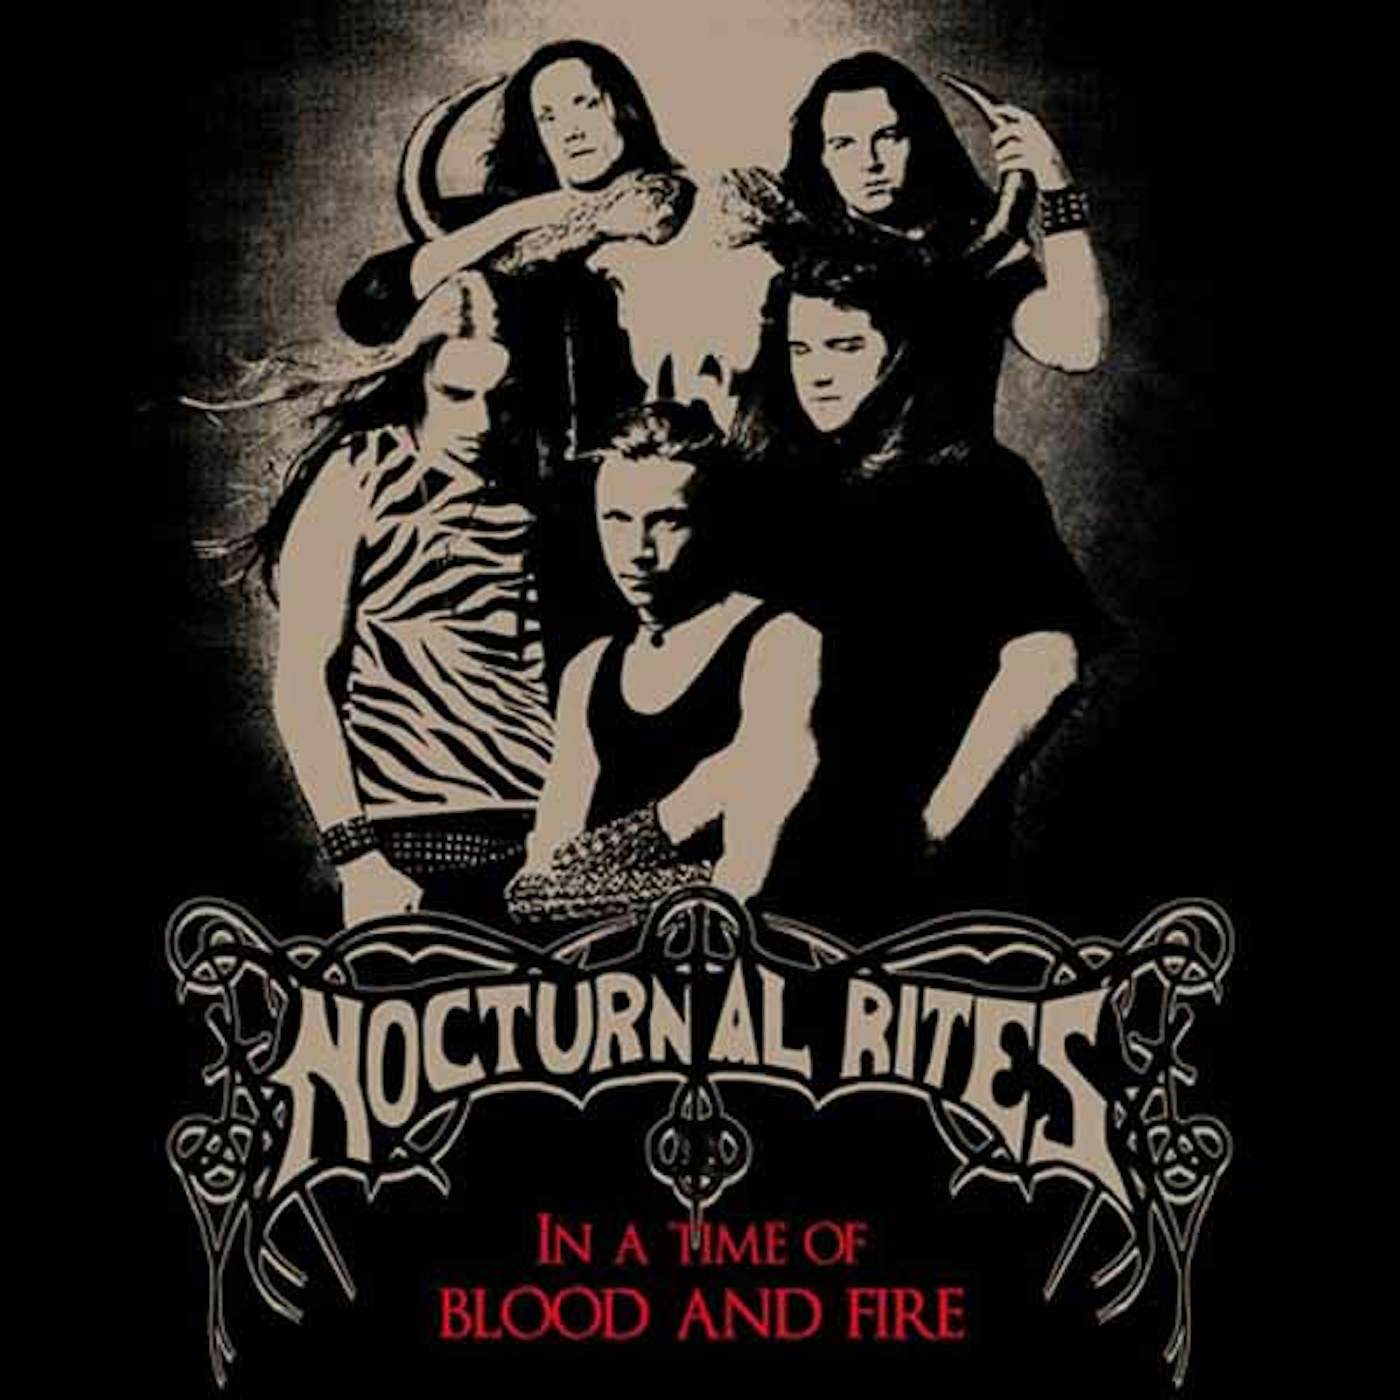 Nocturnal Rites LP - In A Time Of Blood And Fire (Vinyl)